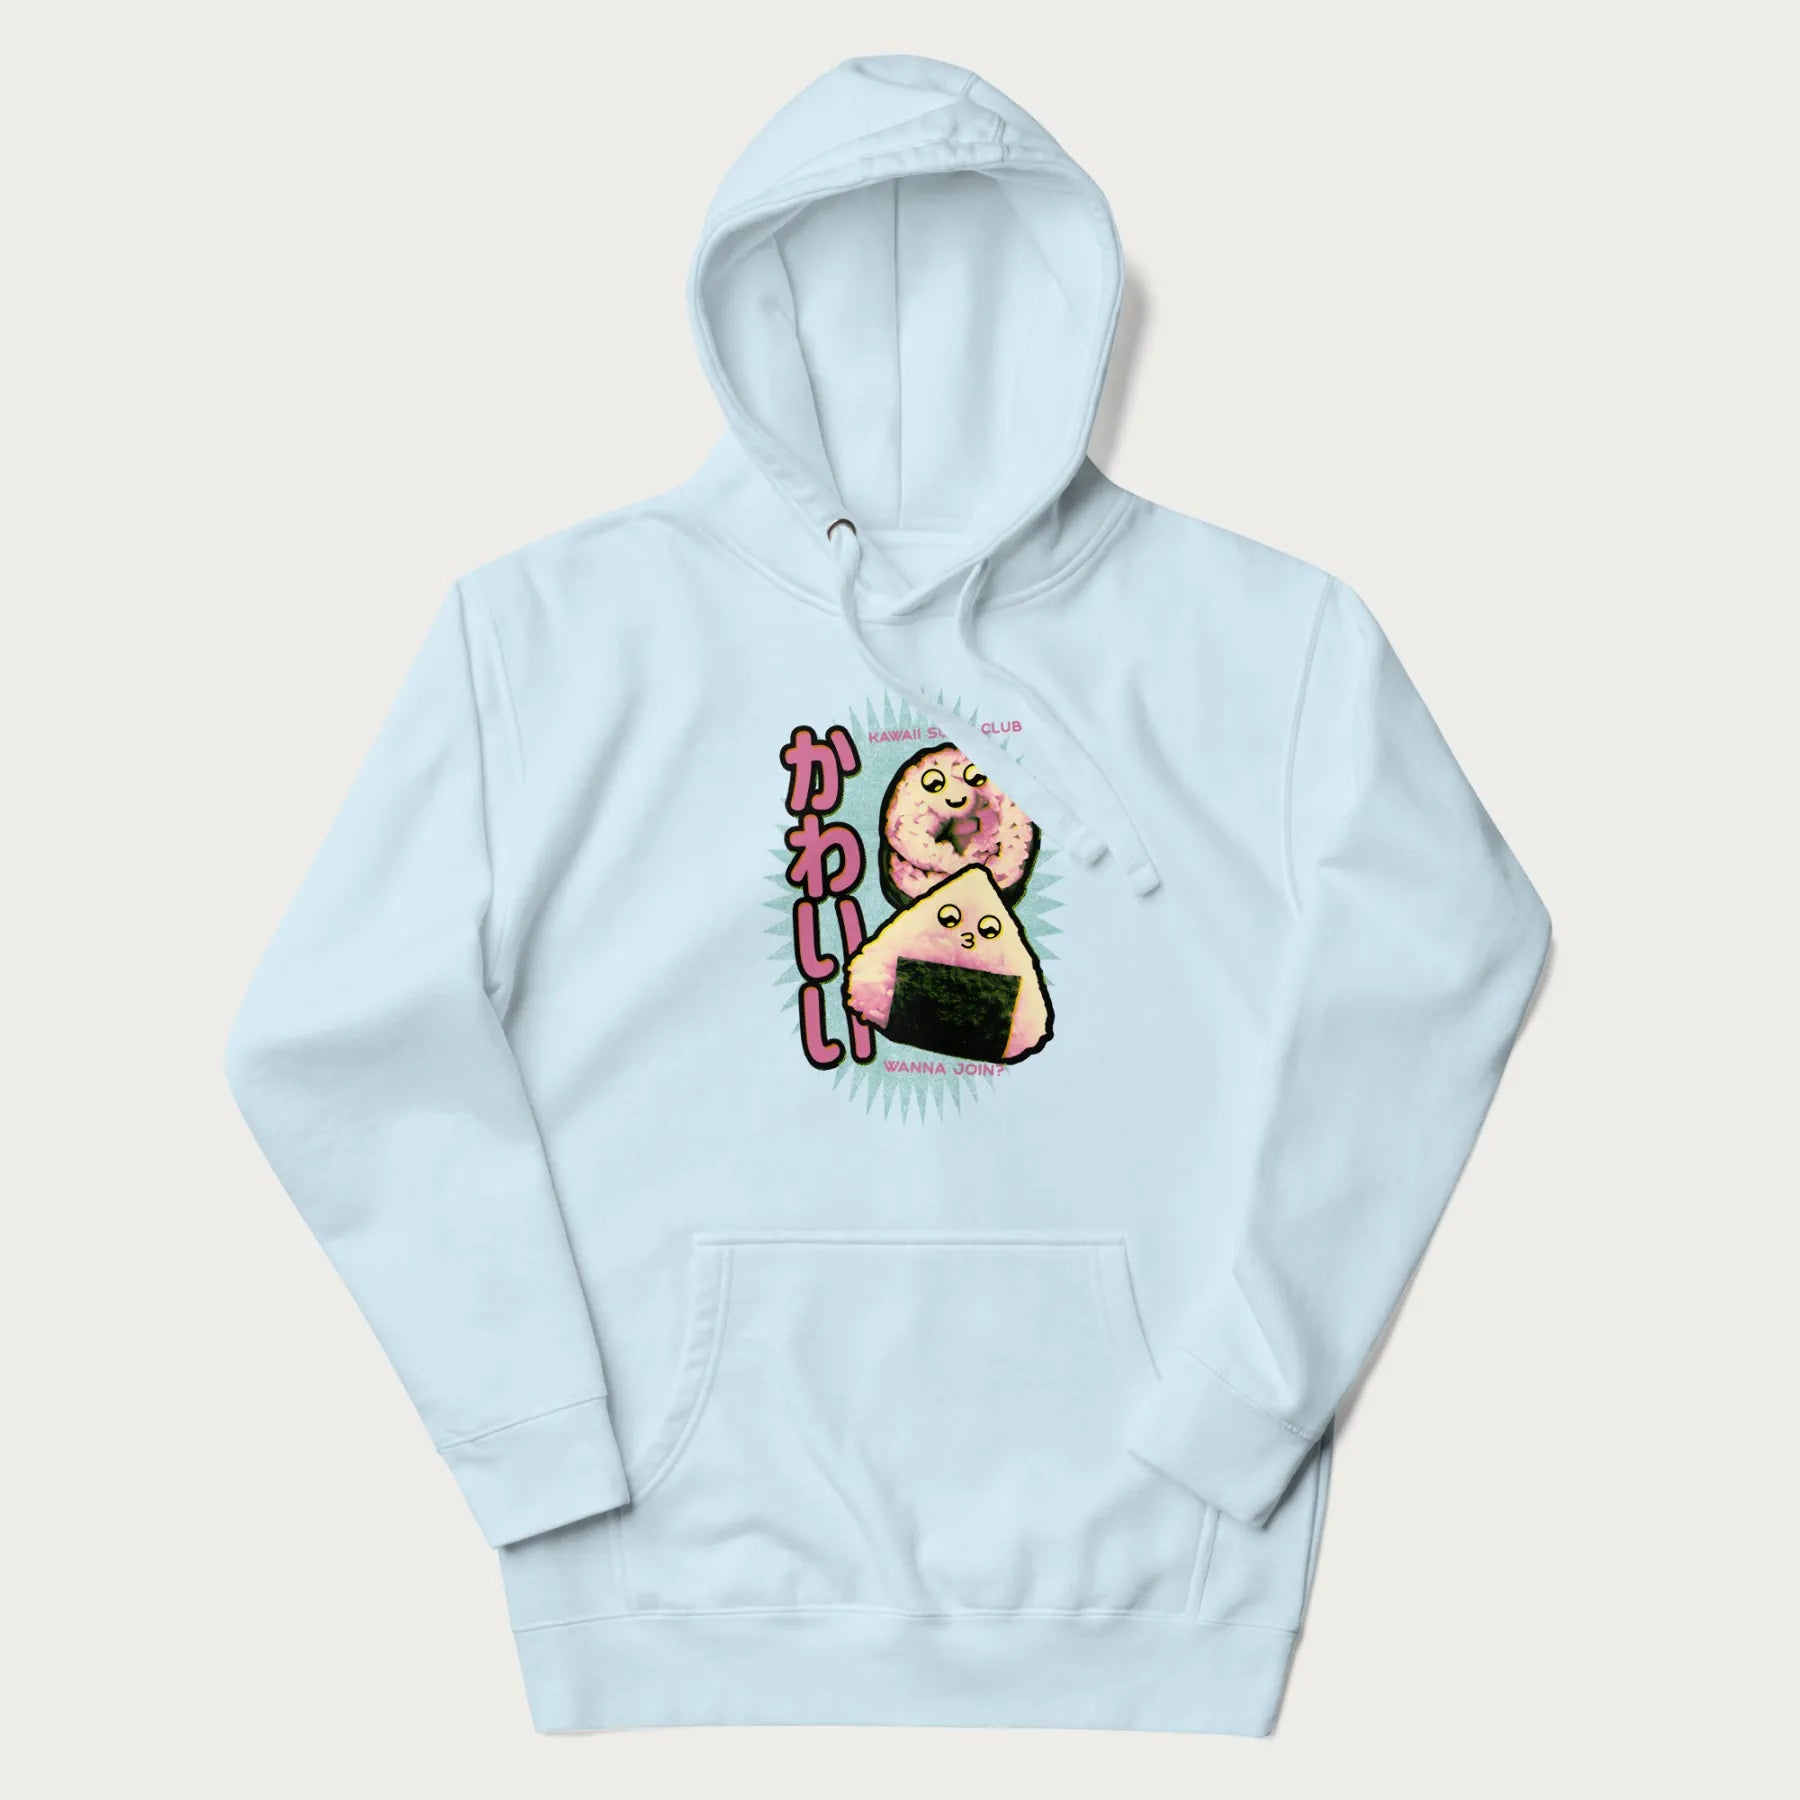 Light blue hoodie featuring a cute sushi and onigiri graphic with the text "Kawaii Sushi Club", colorful neon accents and Japanese characters.